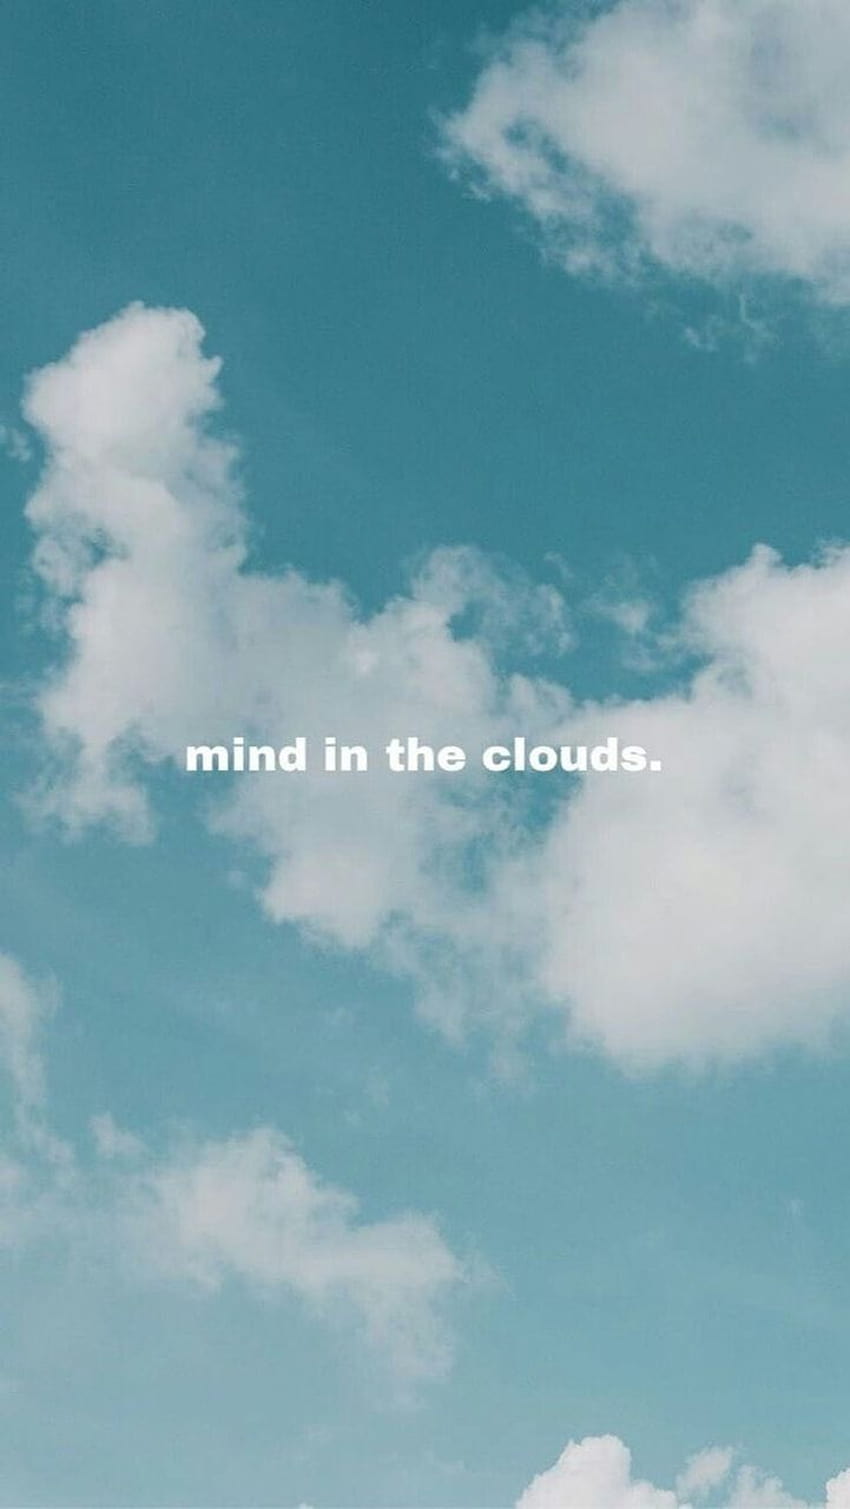 Tumblr Clouds posted by Ryan Johnson, cloudy tumblr HD phone wallpaper